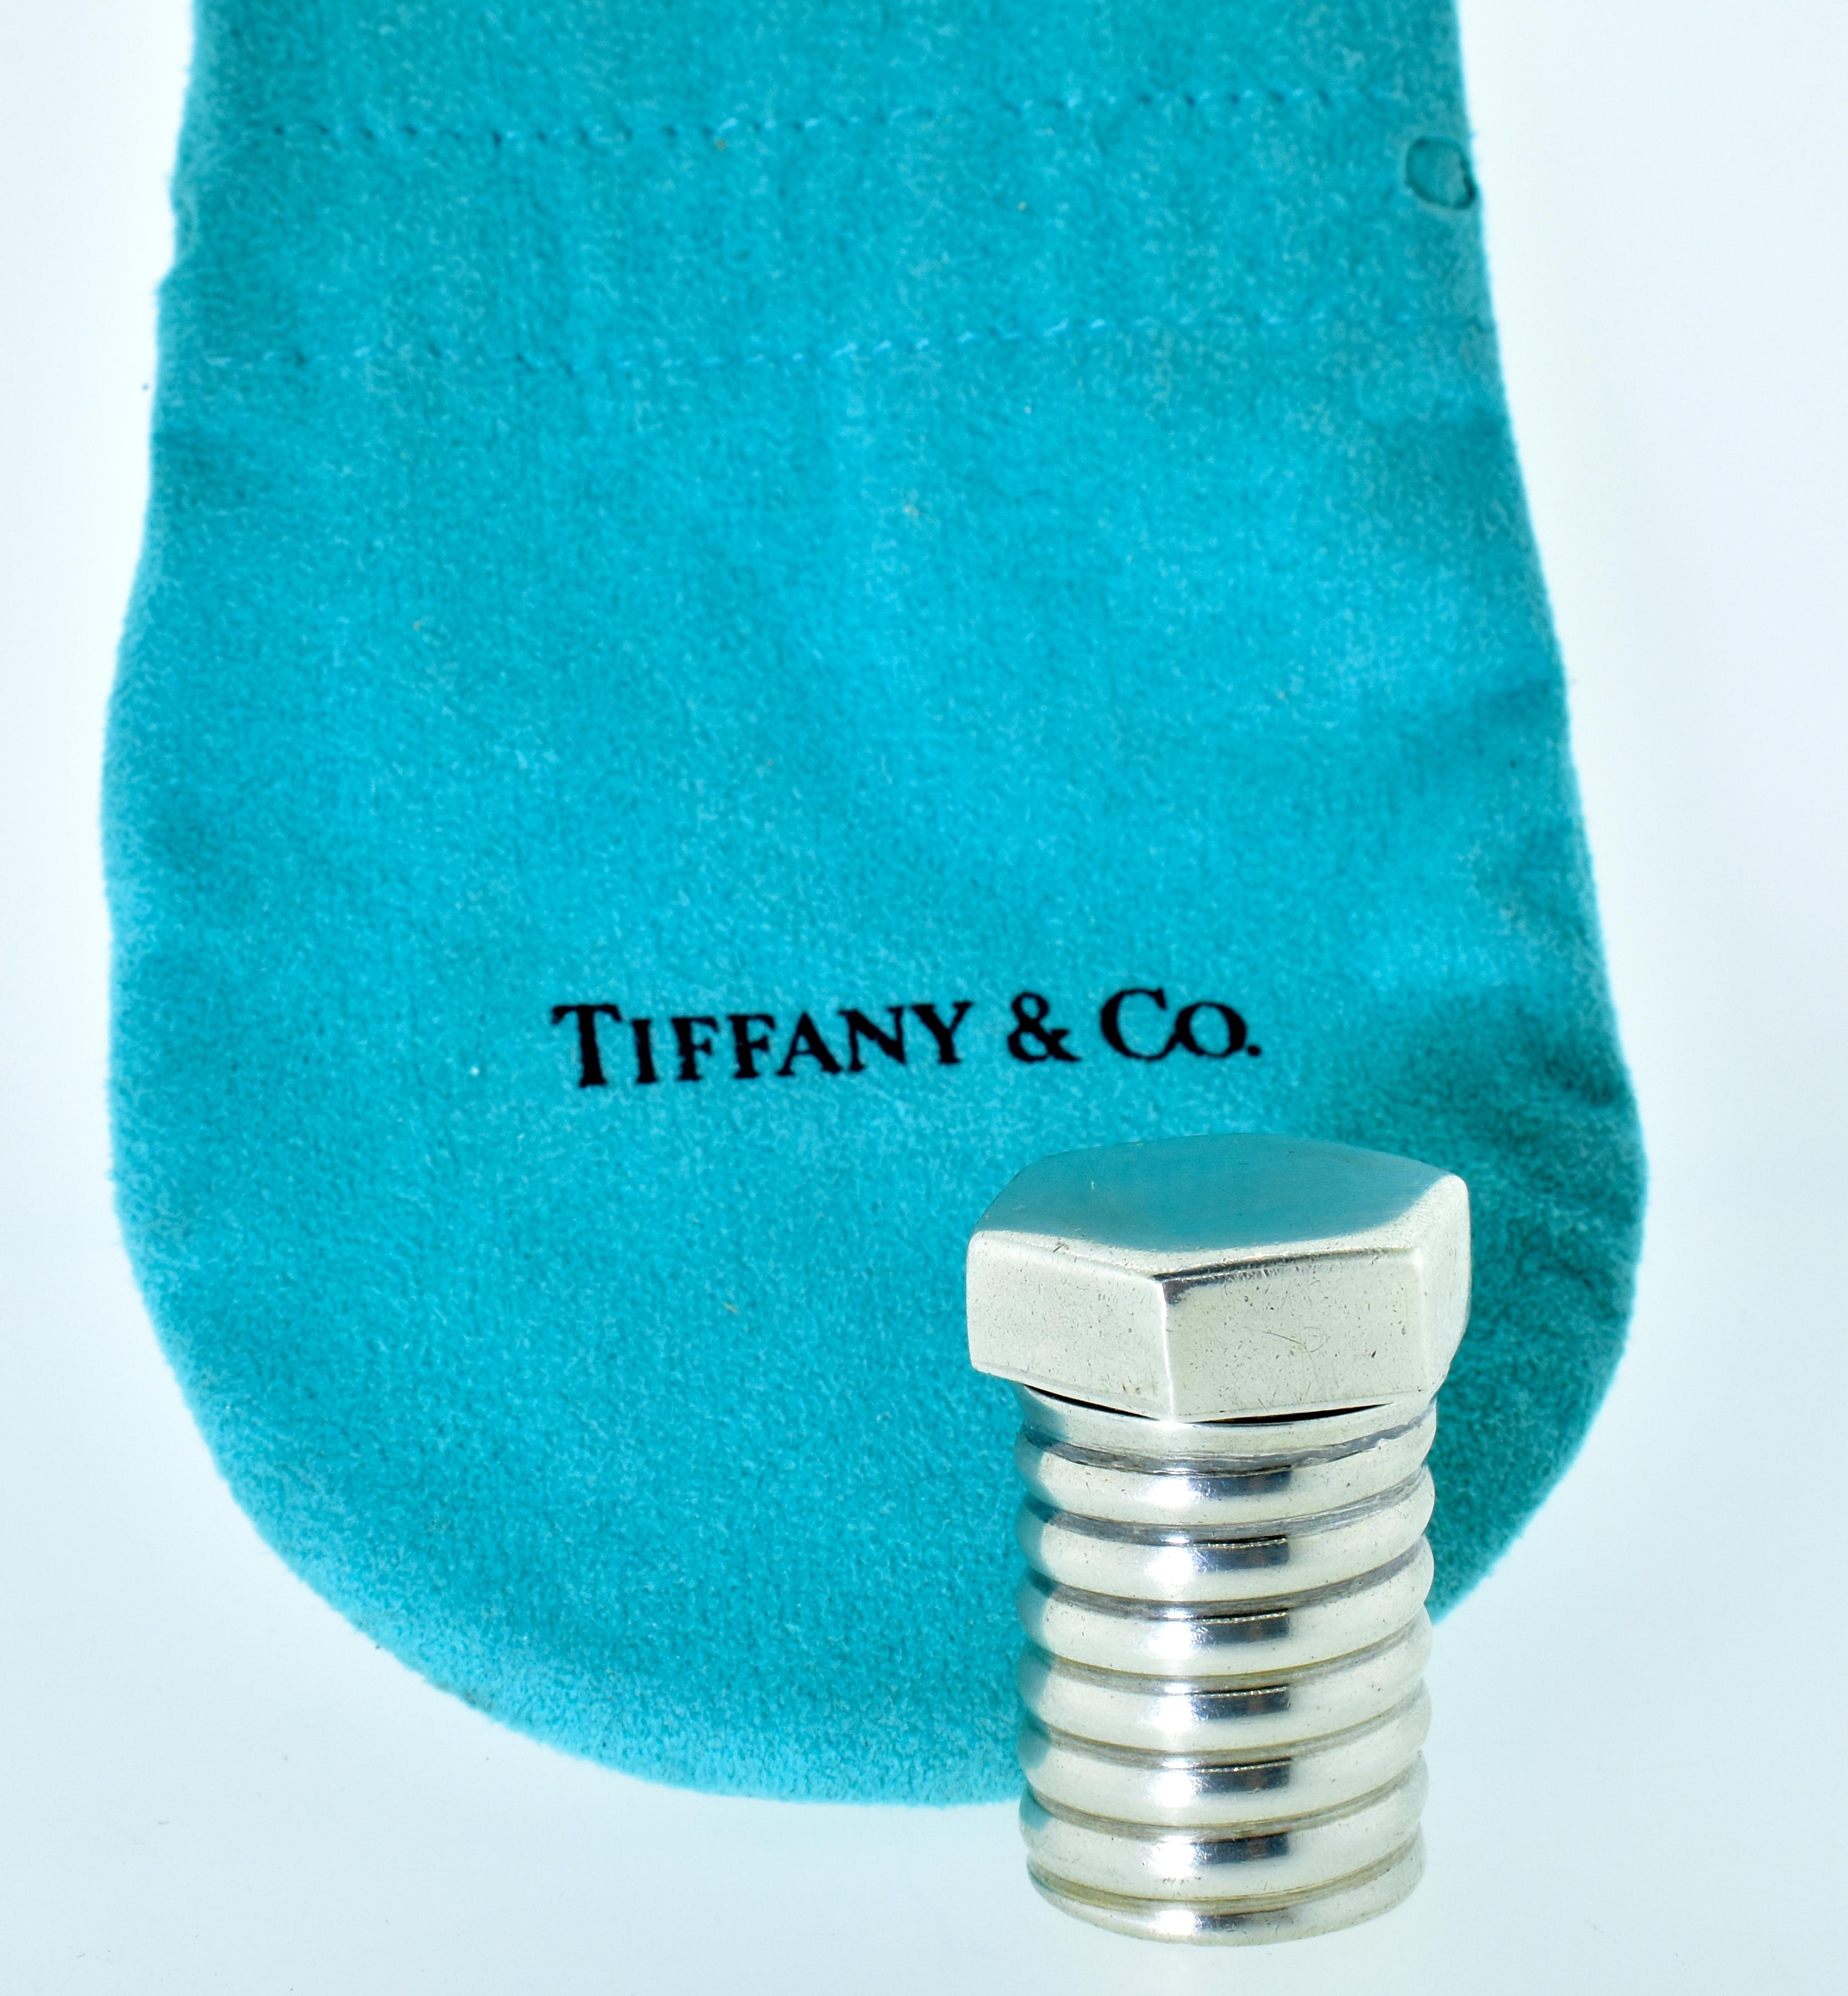 Tiffany & Co. sterling with an interior gold wash small pill holder in a screw/bolt motif.  This vintage object is 1 3/8th inches tall.  The top screws off and on and is meant to hold anything one wants, it is an unusual vintage Tiffany sterling